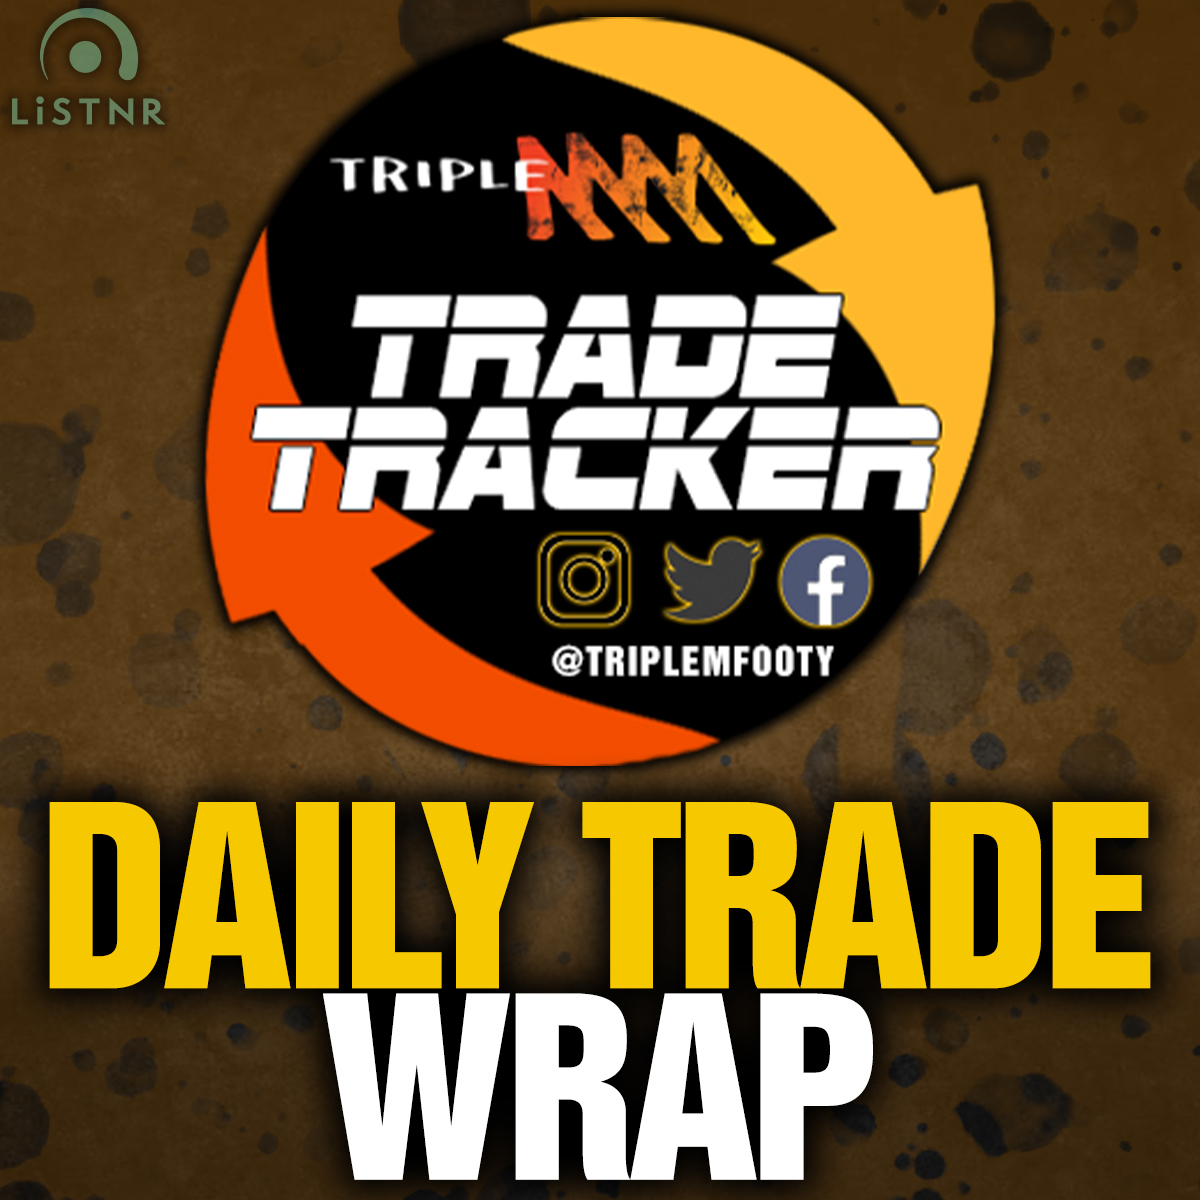 Jeff Kennett's letter, Tigers and Roos get their men, where's Rory Lobb going - Triple M Footy's Trade Tracker Podcast - Friday 8th October 2021